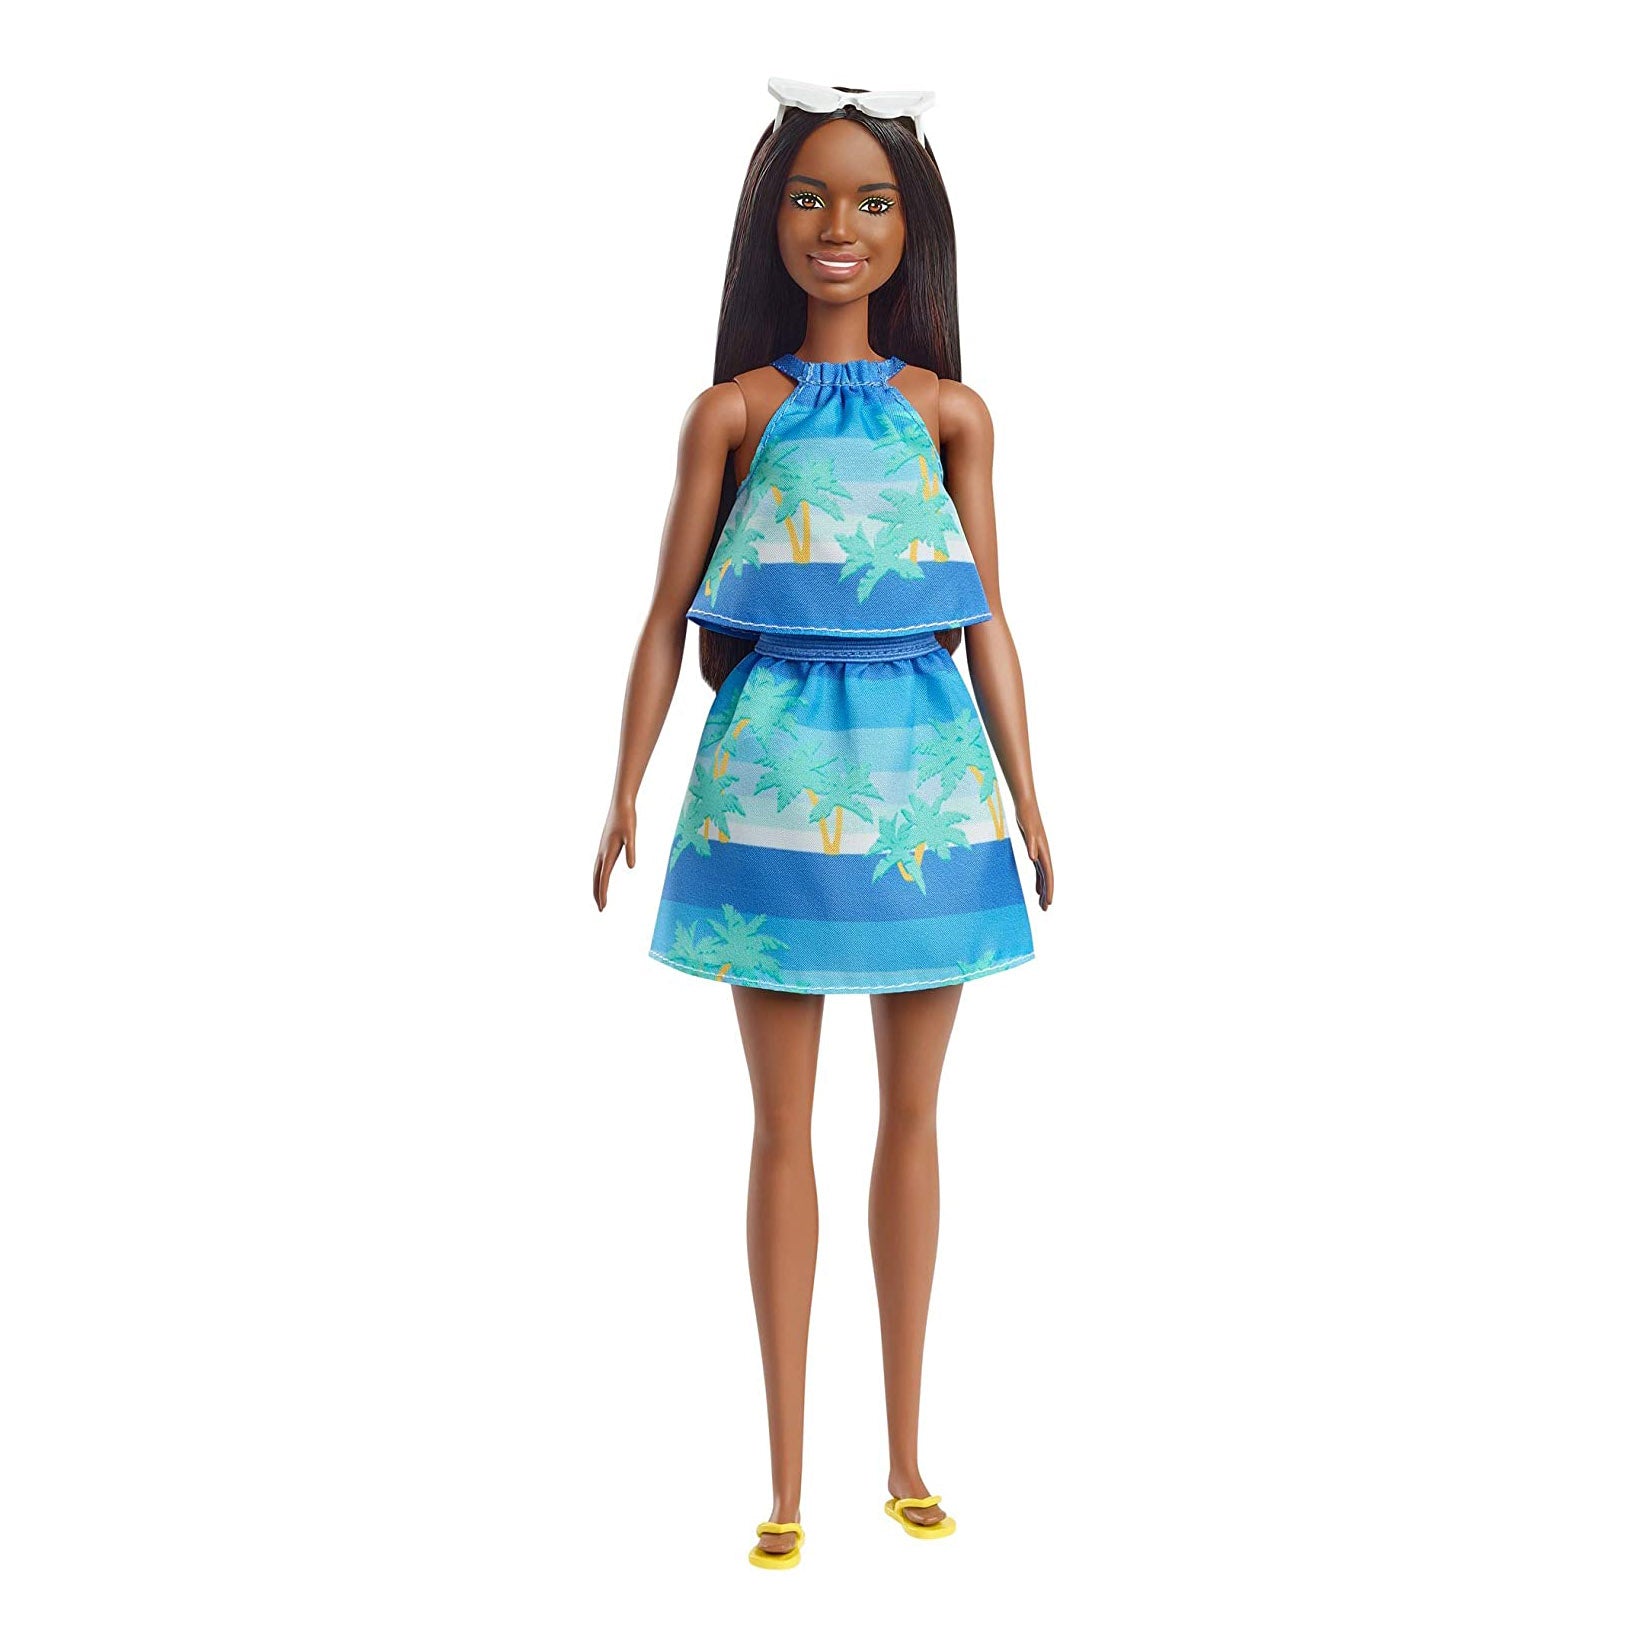 Barbie Loves The Ocean - Doll  (Sold Separately Subject To Availability)